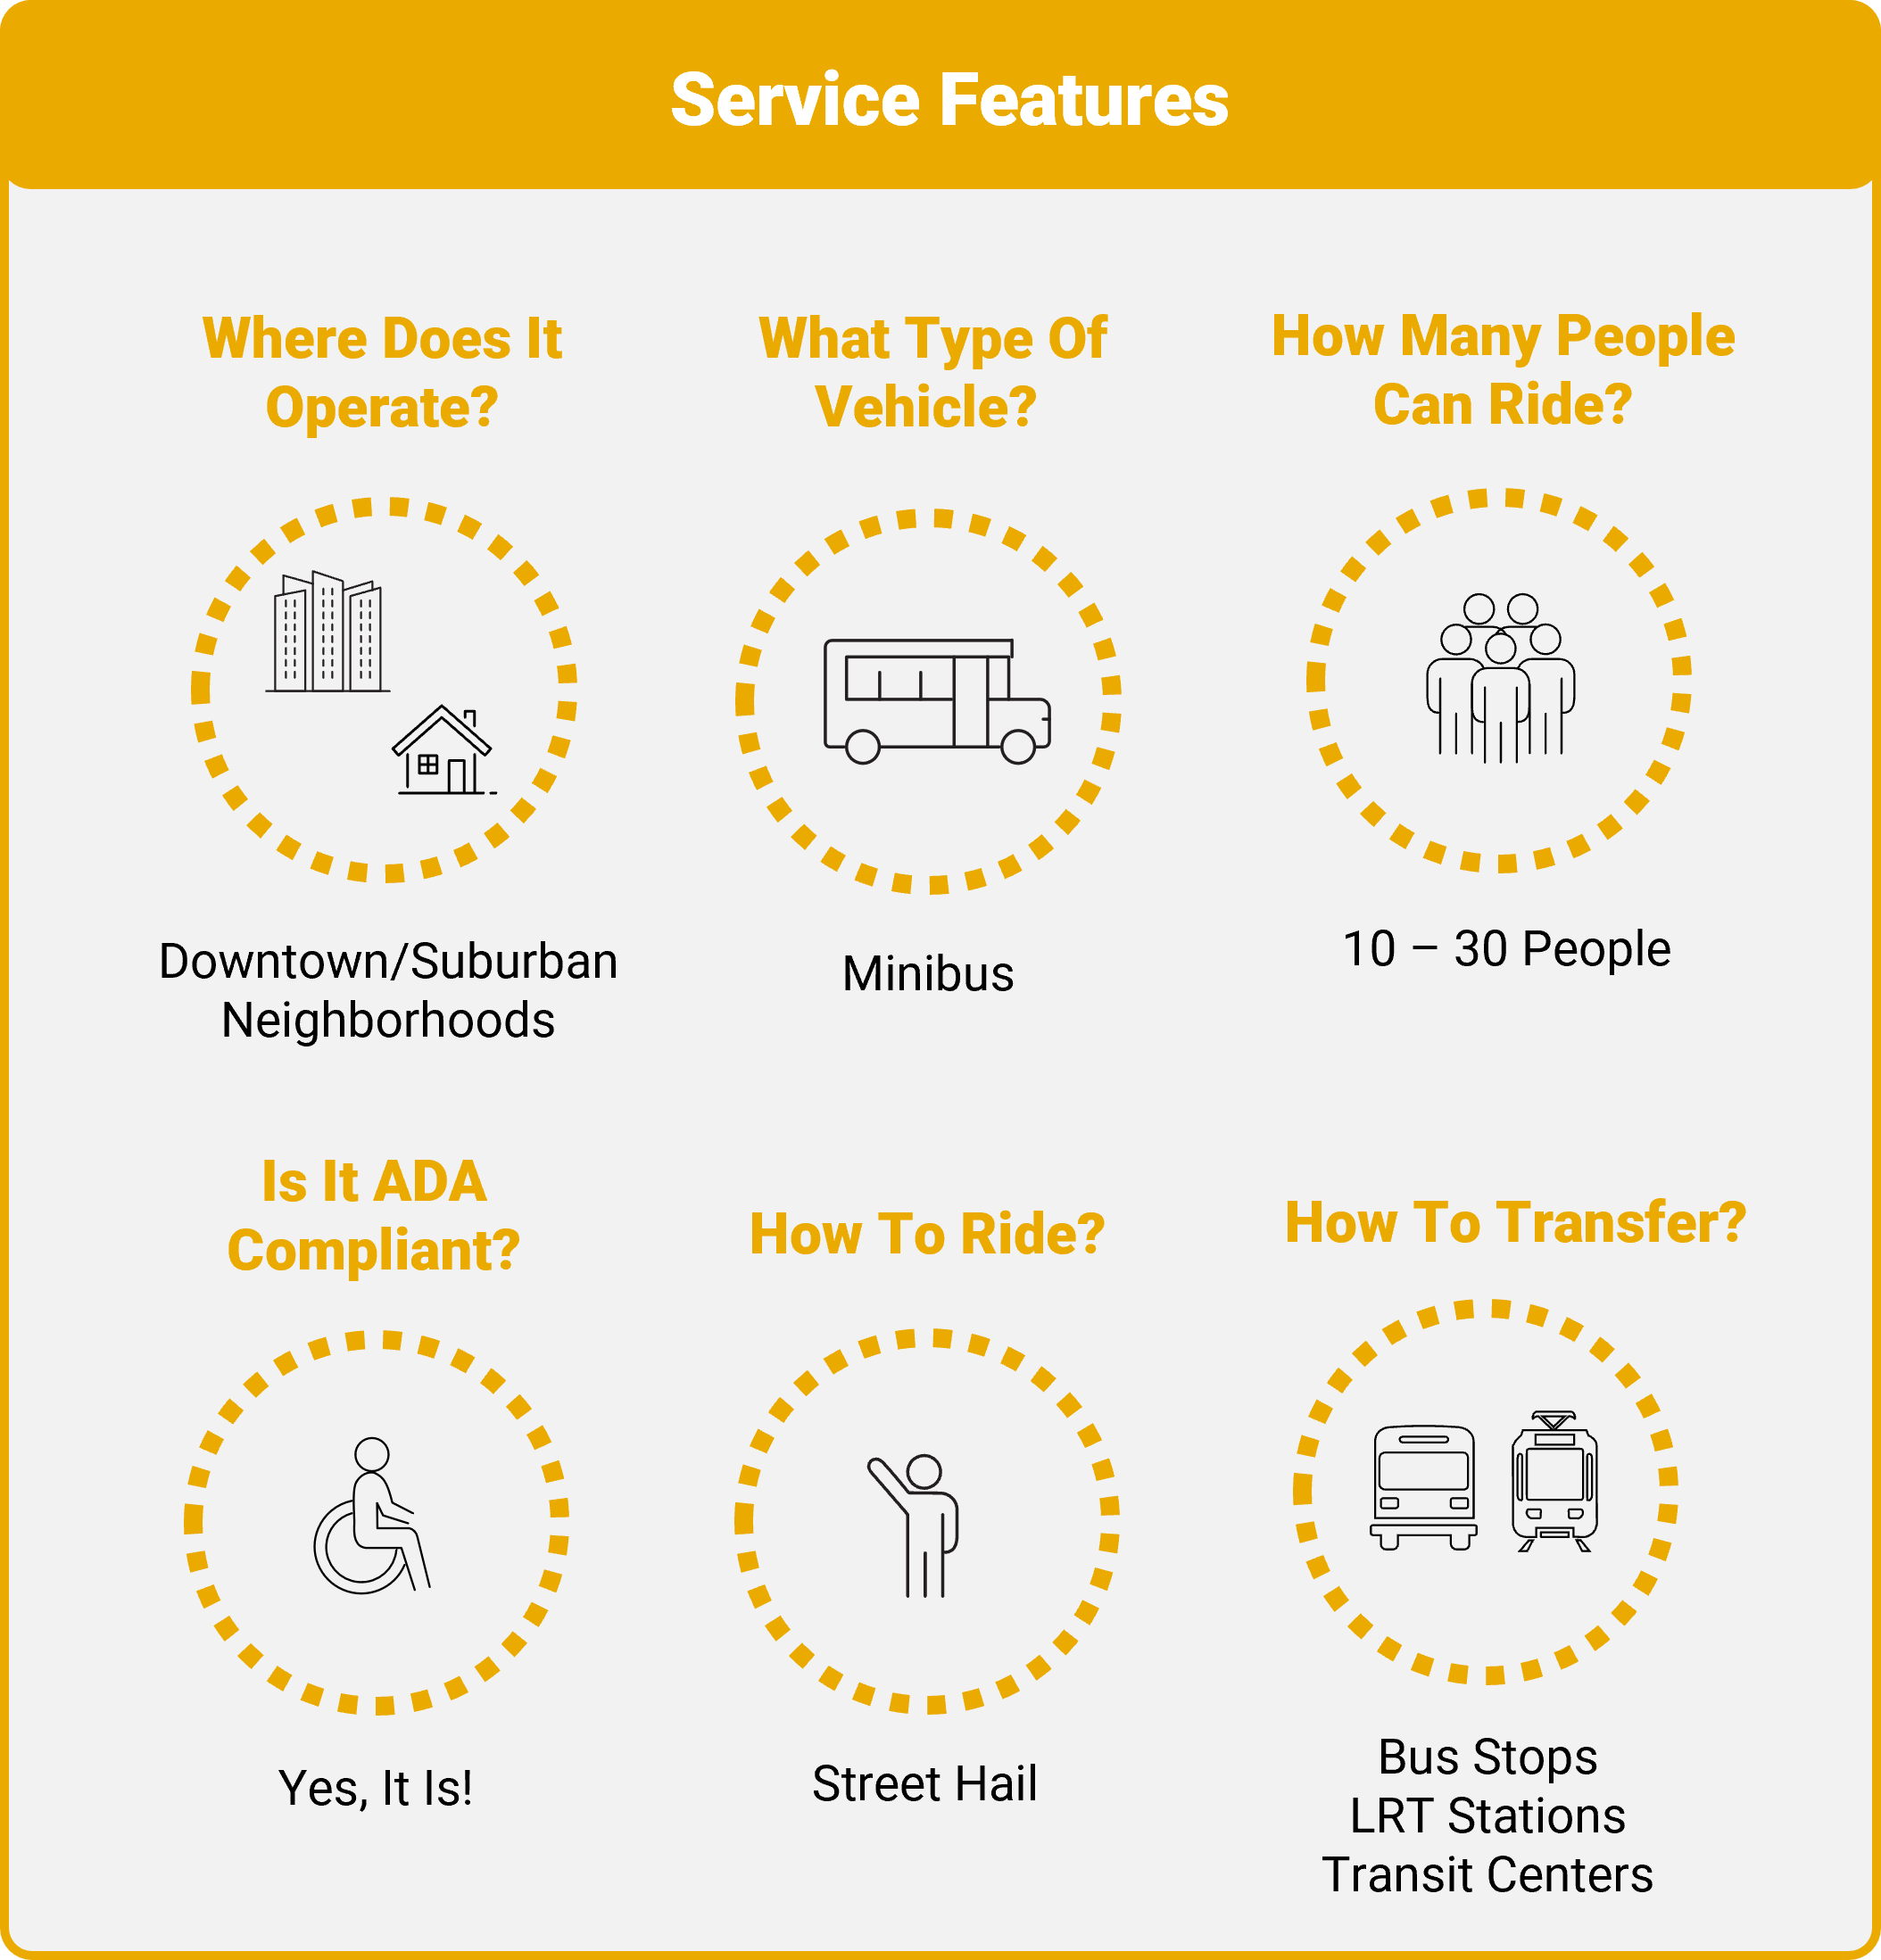 Service Features